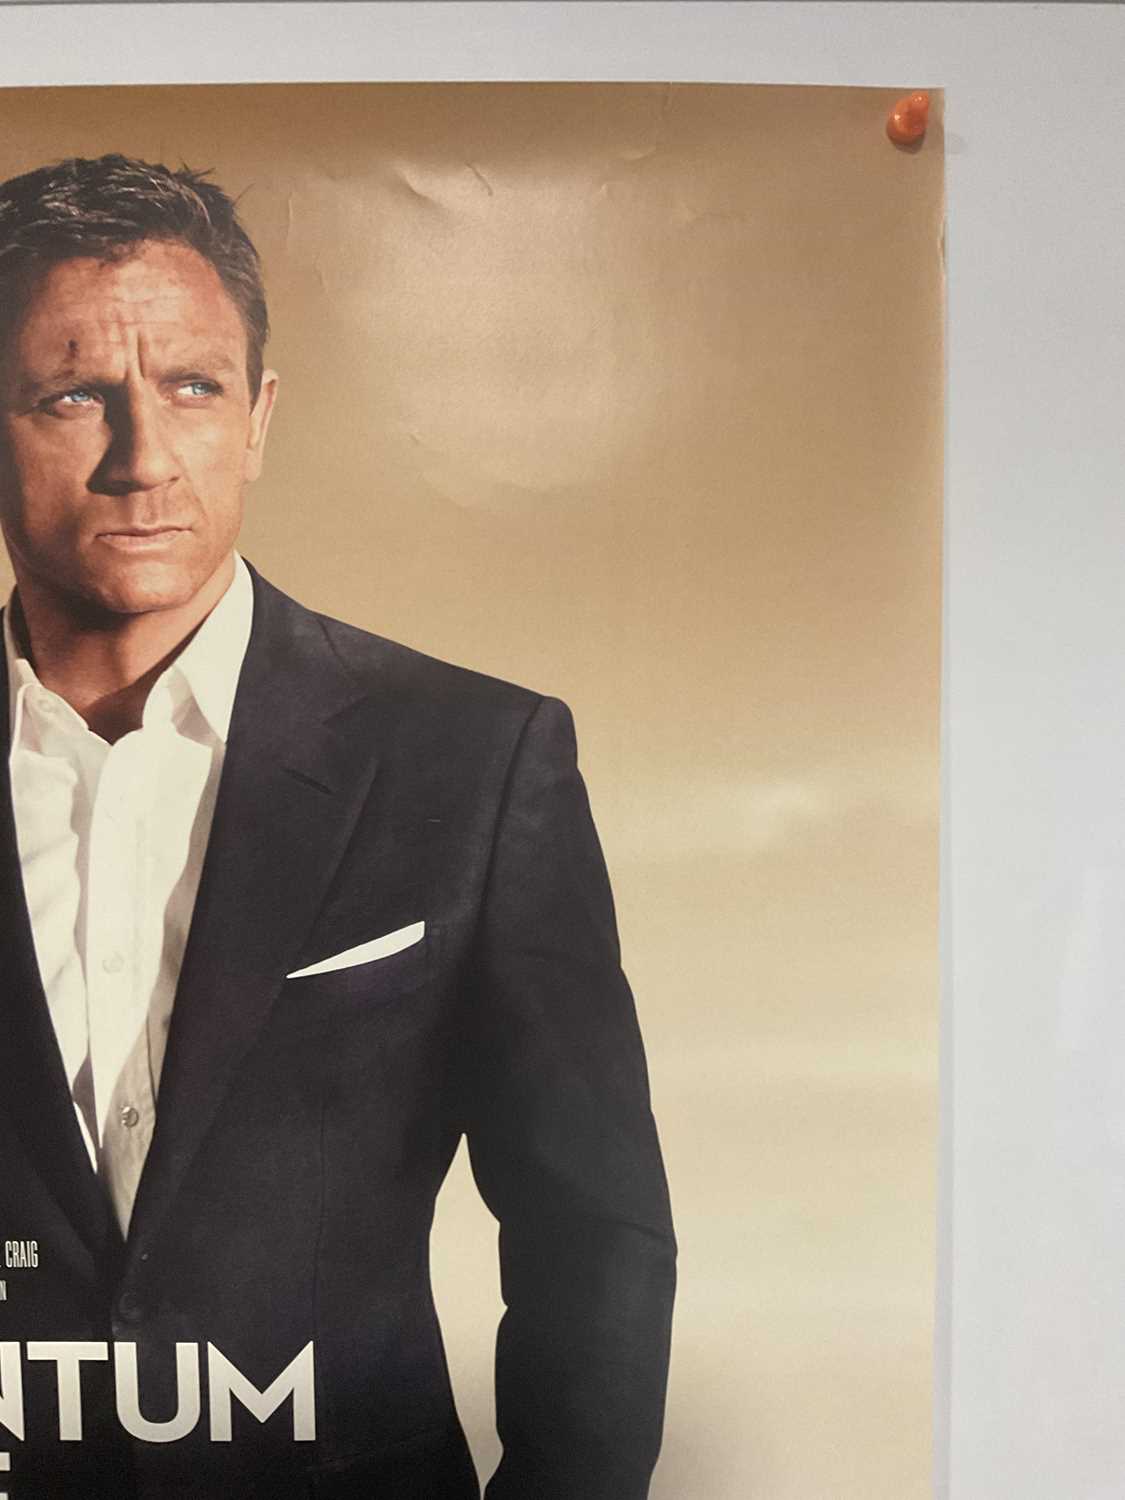 QUANTUM OF SOLACE (2008) UK one sheet, matte finish, Daniel Craig's eyes touched up in blue with - Image 2 of 6